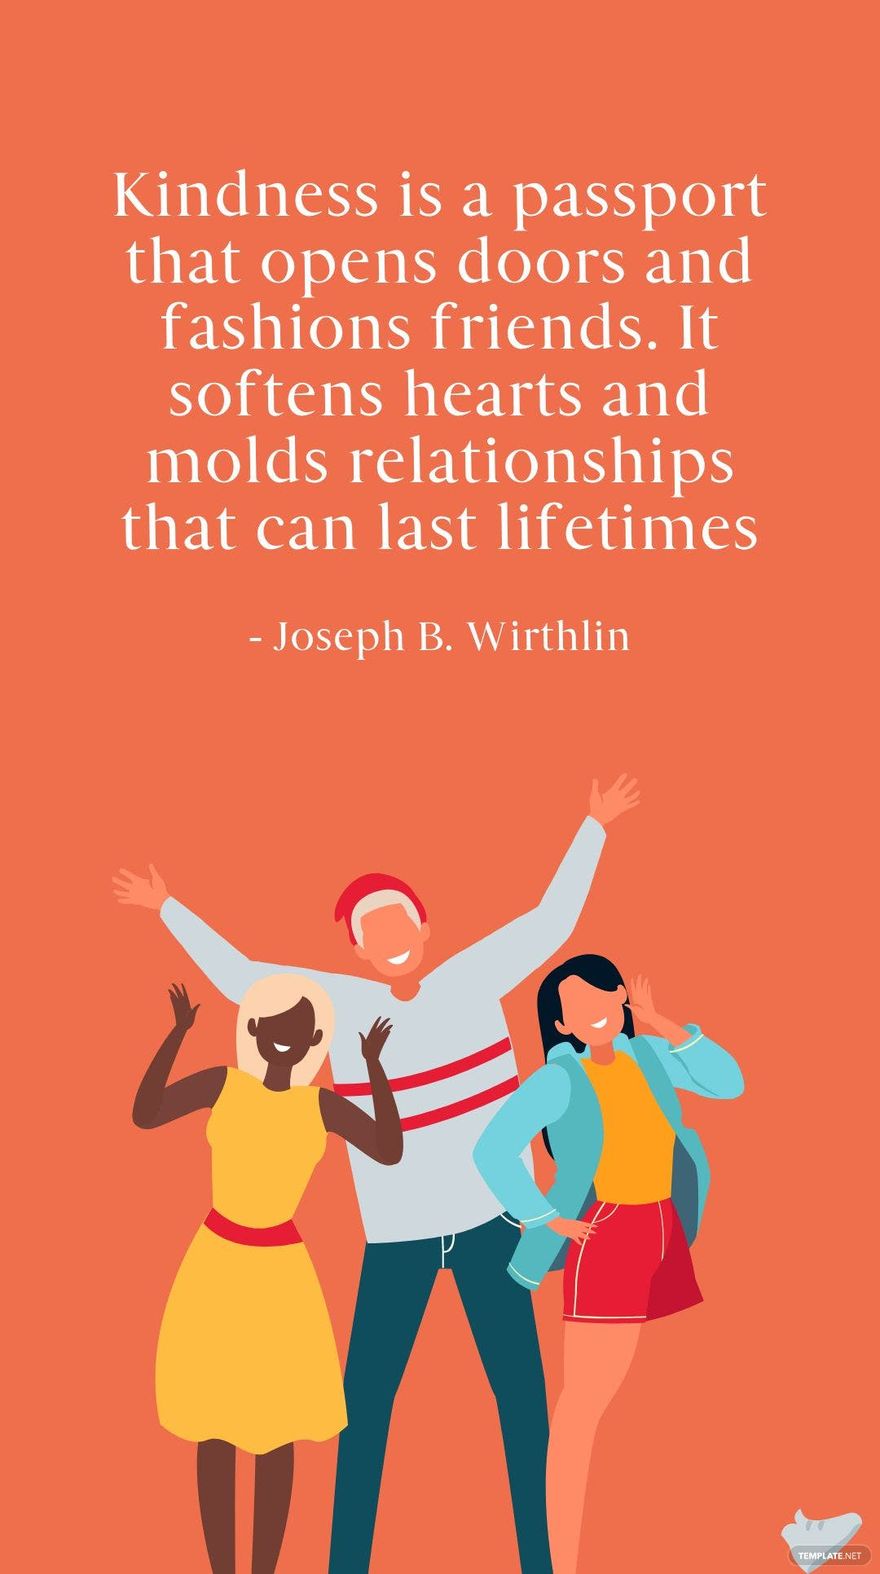 Joseph B. Wirthlin - Kindness is a passport that opens doors and fashions friends. It softens hearts and molds relationships that can last lifetimes in JPG